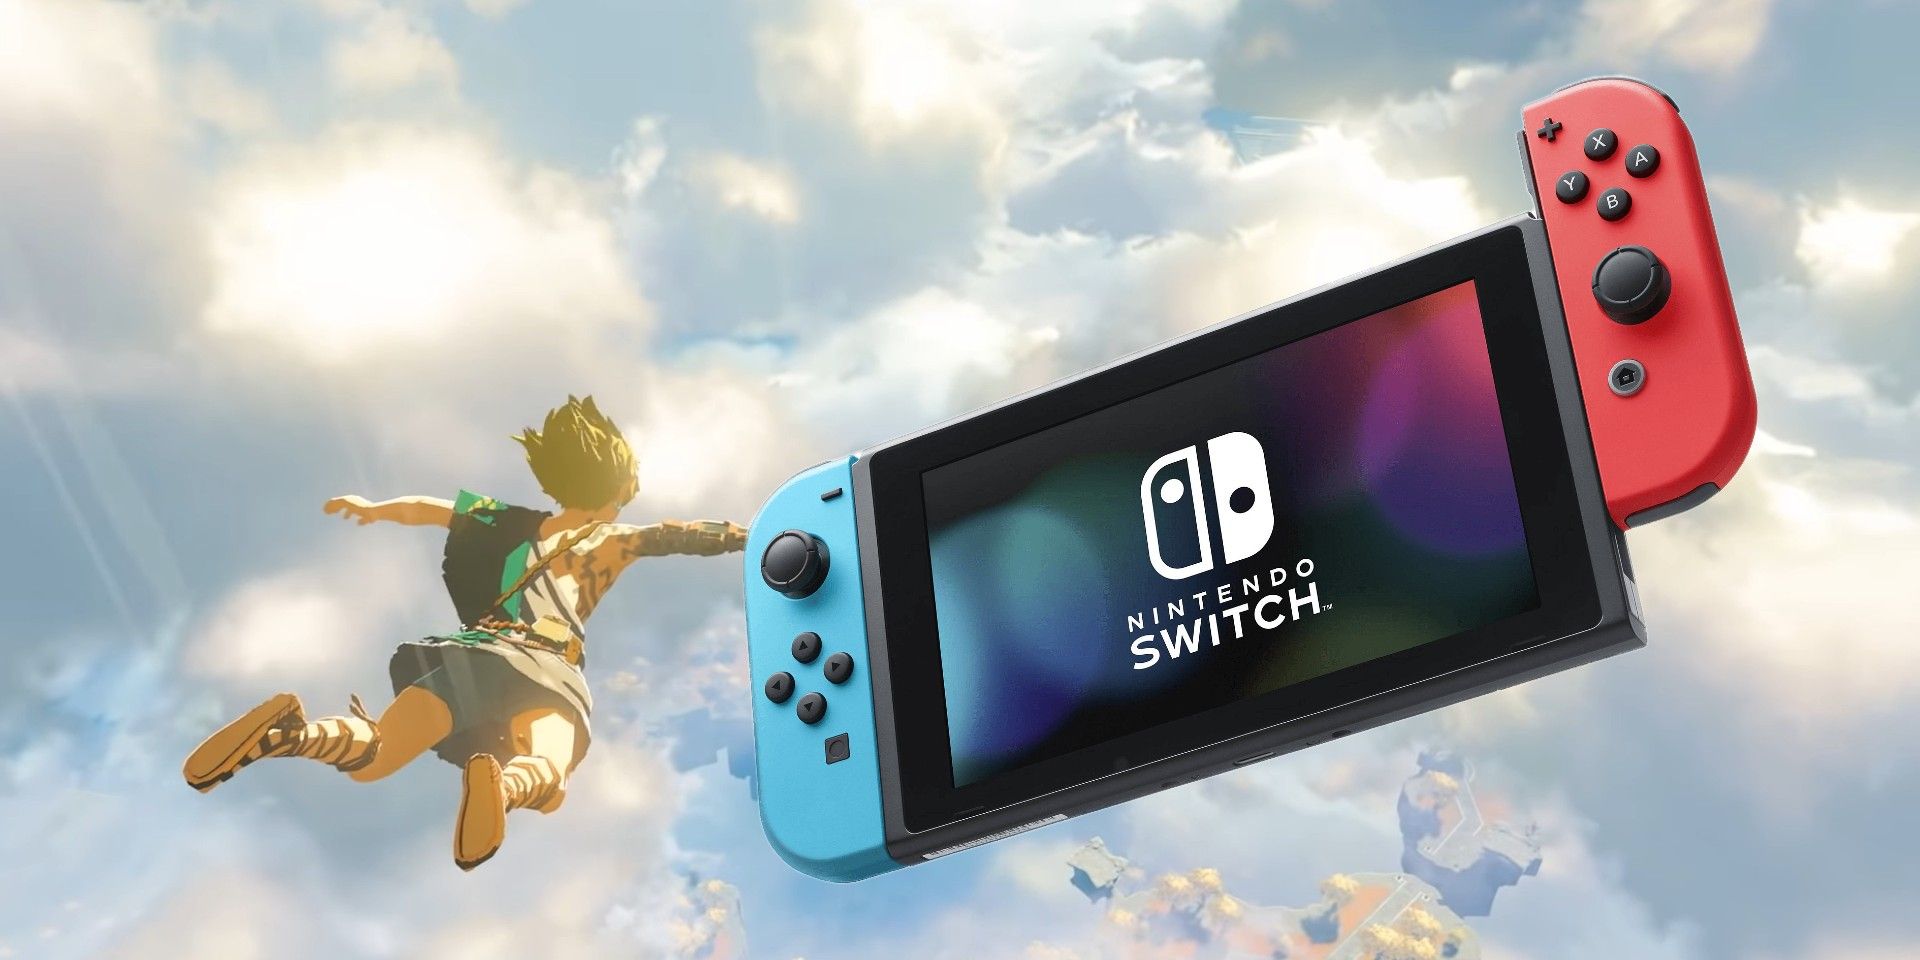 Why The Nintendo Switch Pro Hasnt Been Announced Does It Exist